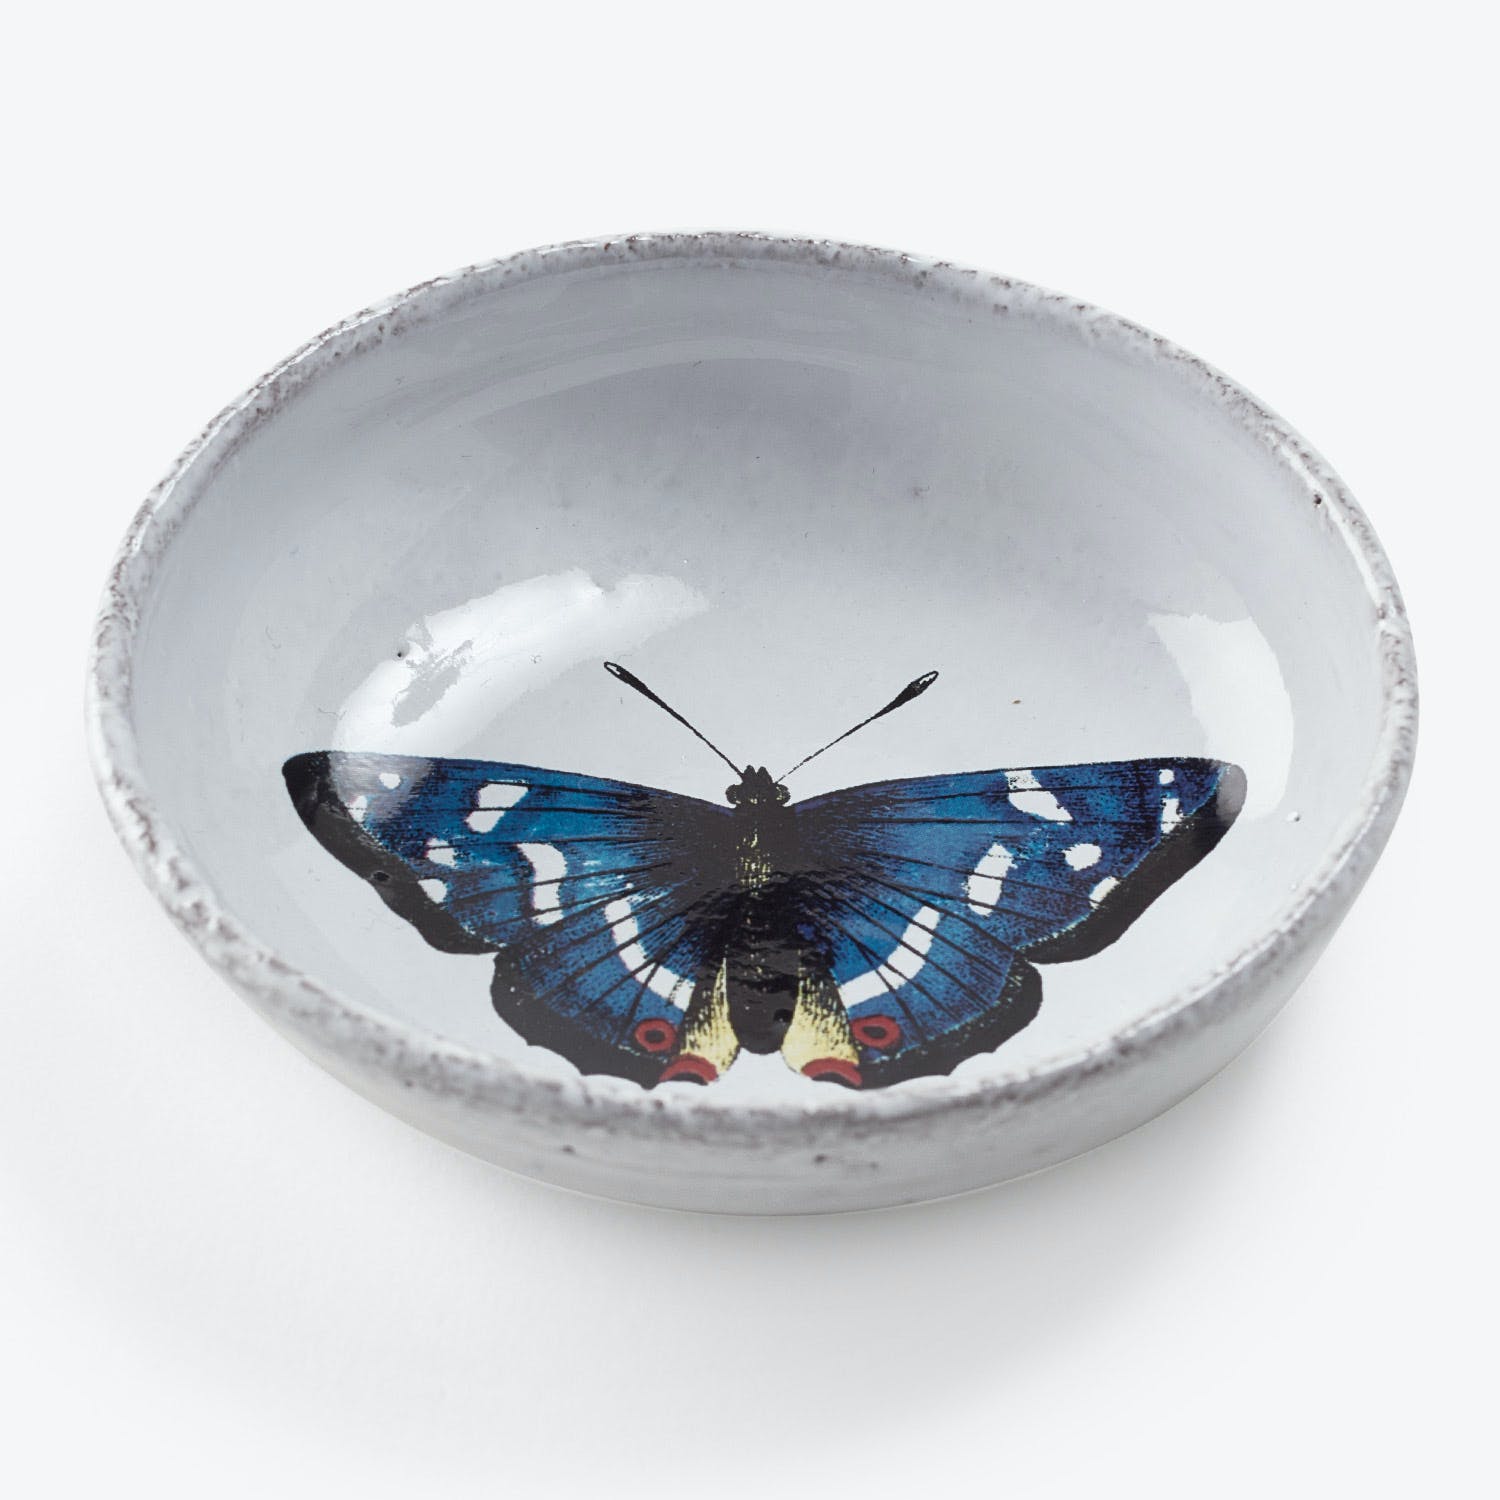 Ceramic bowl with distressed edge showcases vibrant butterfly illustration inside.